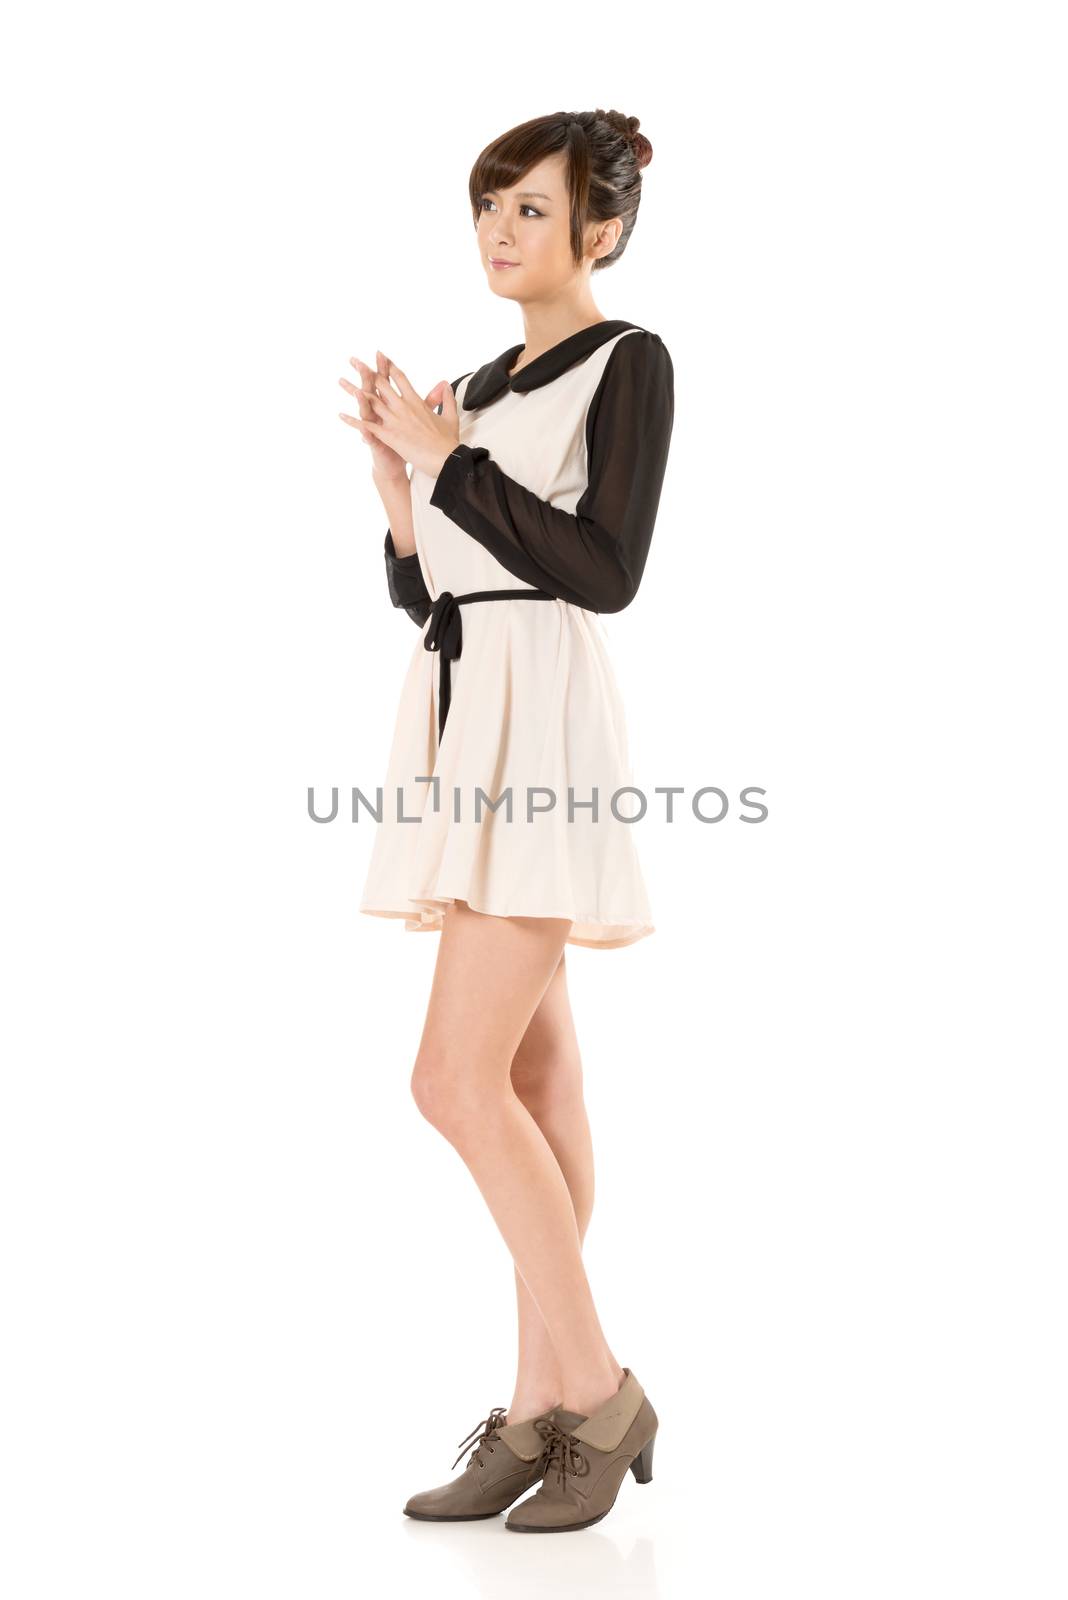 Asian beauty wear a spring dress, full length portrait isolated on white background.